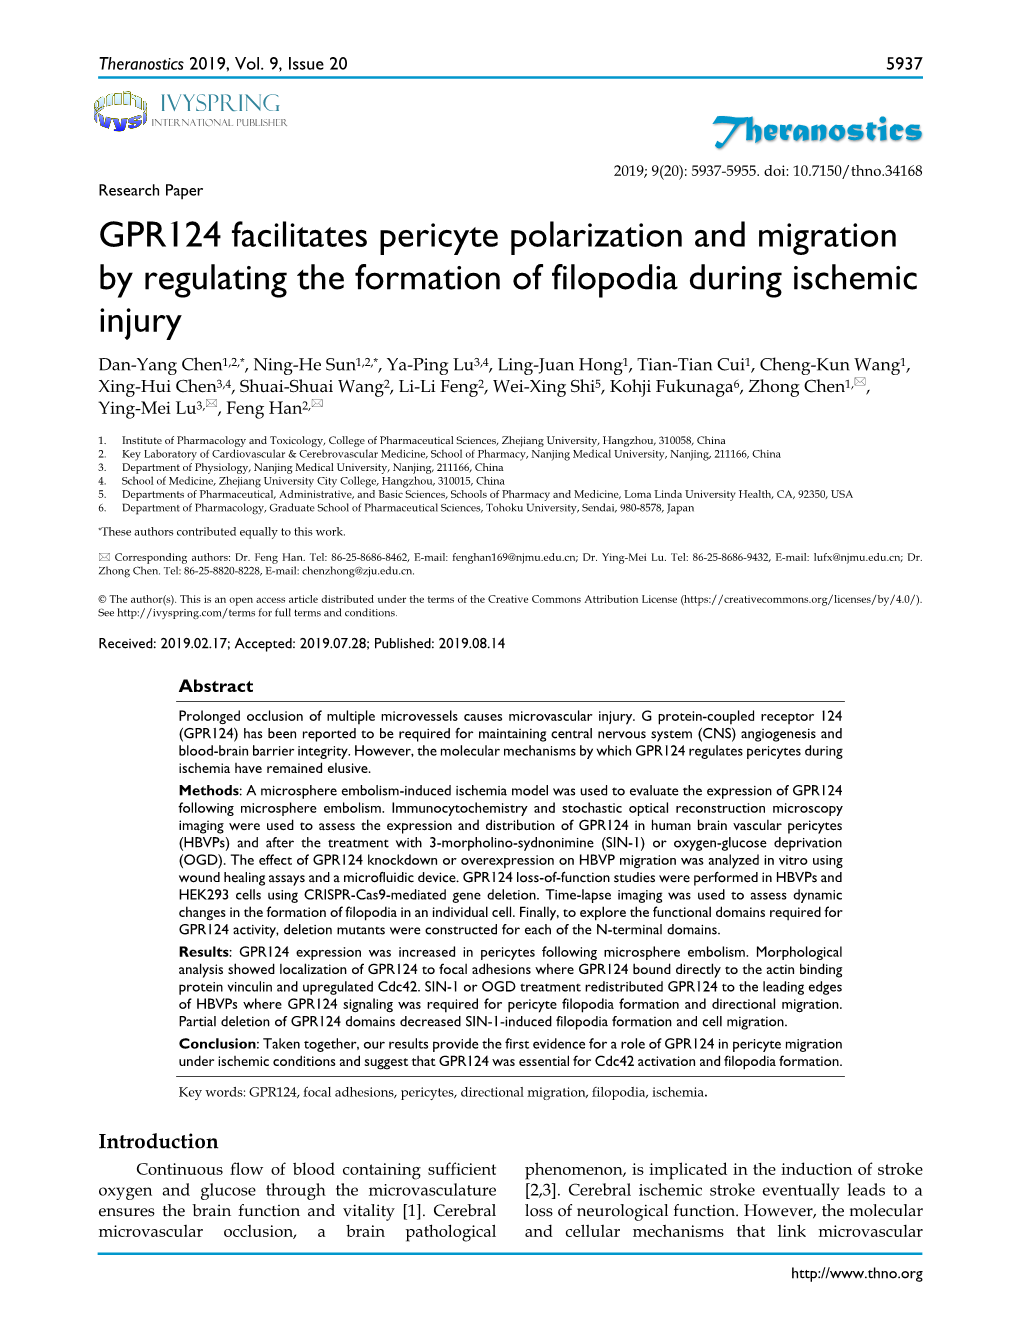 GPR124 Facilitates Pericyte Polarization and Migration by Regulating the Formation of Filopodia During Ischemic Injury